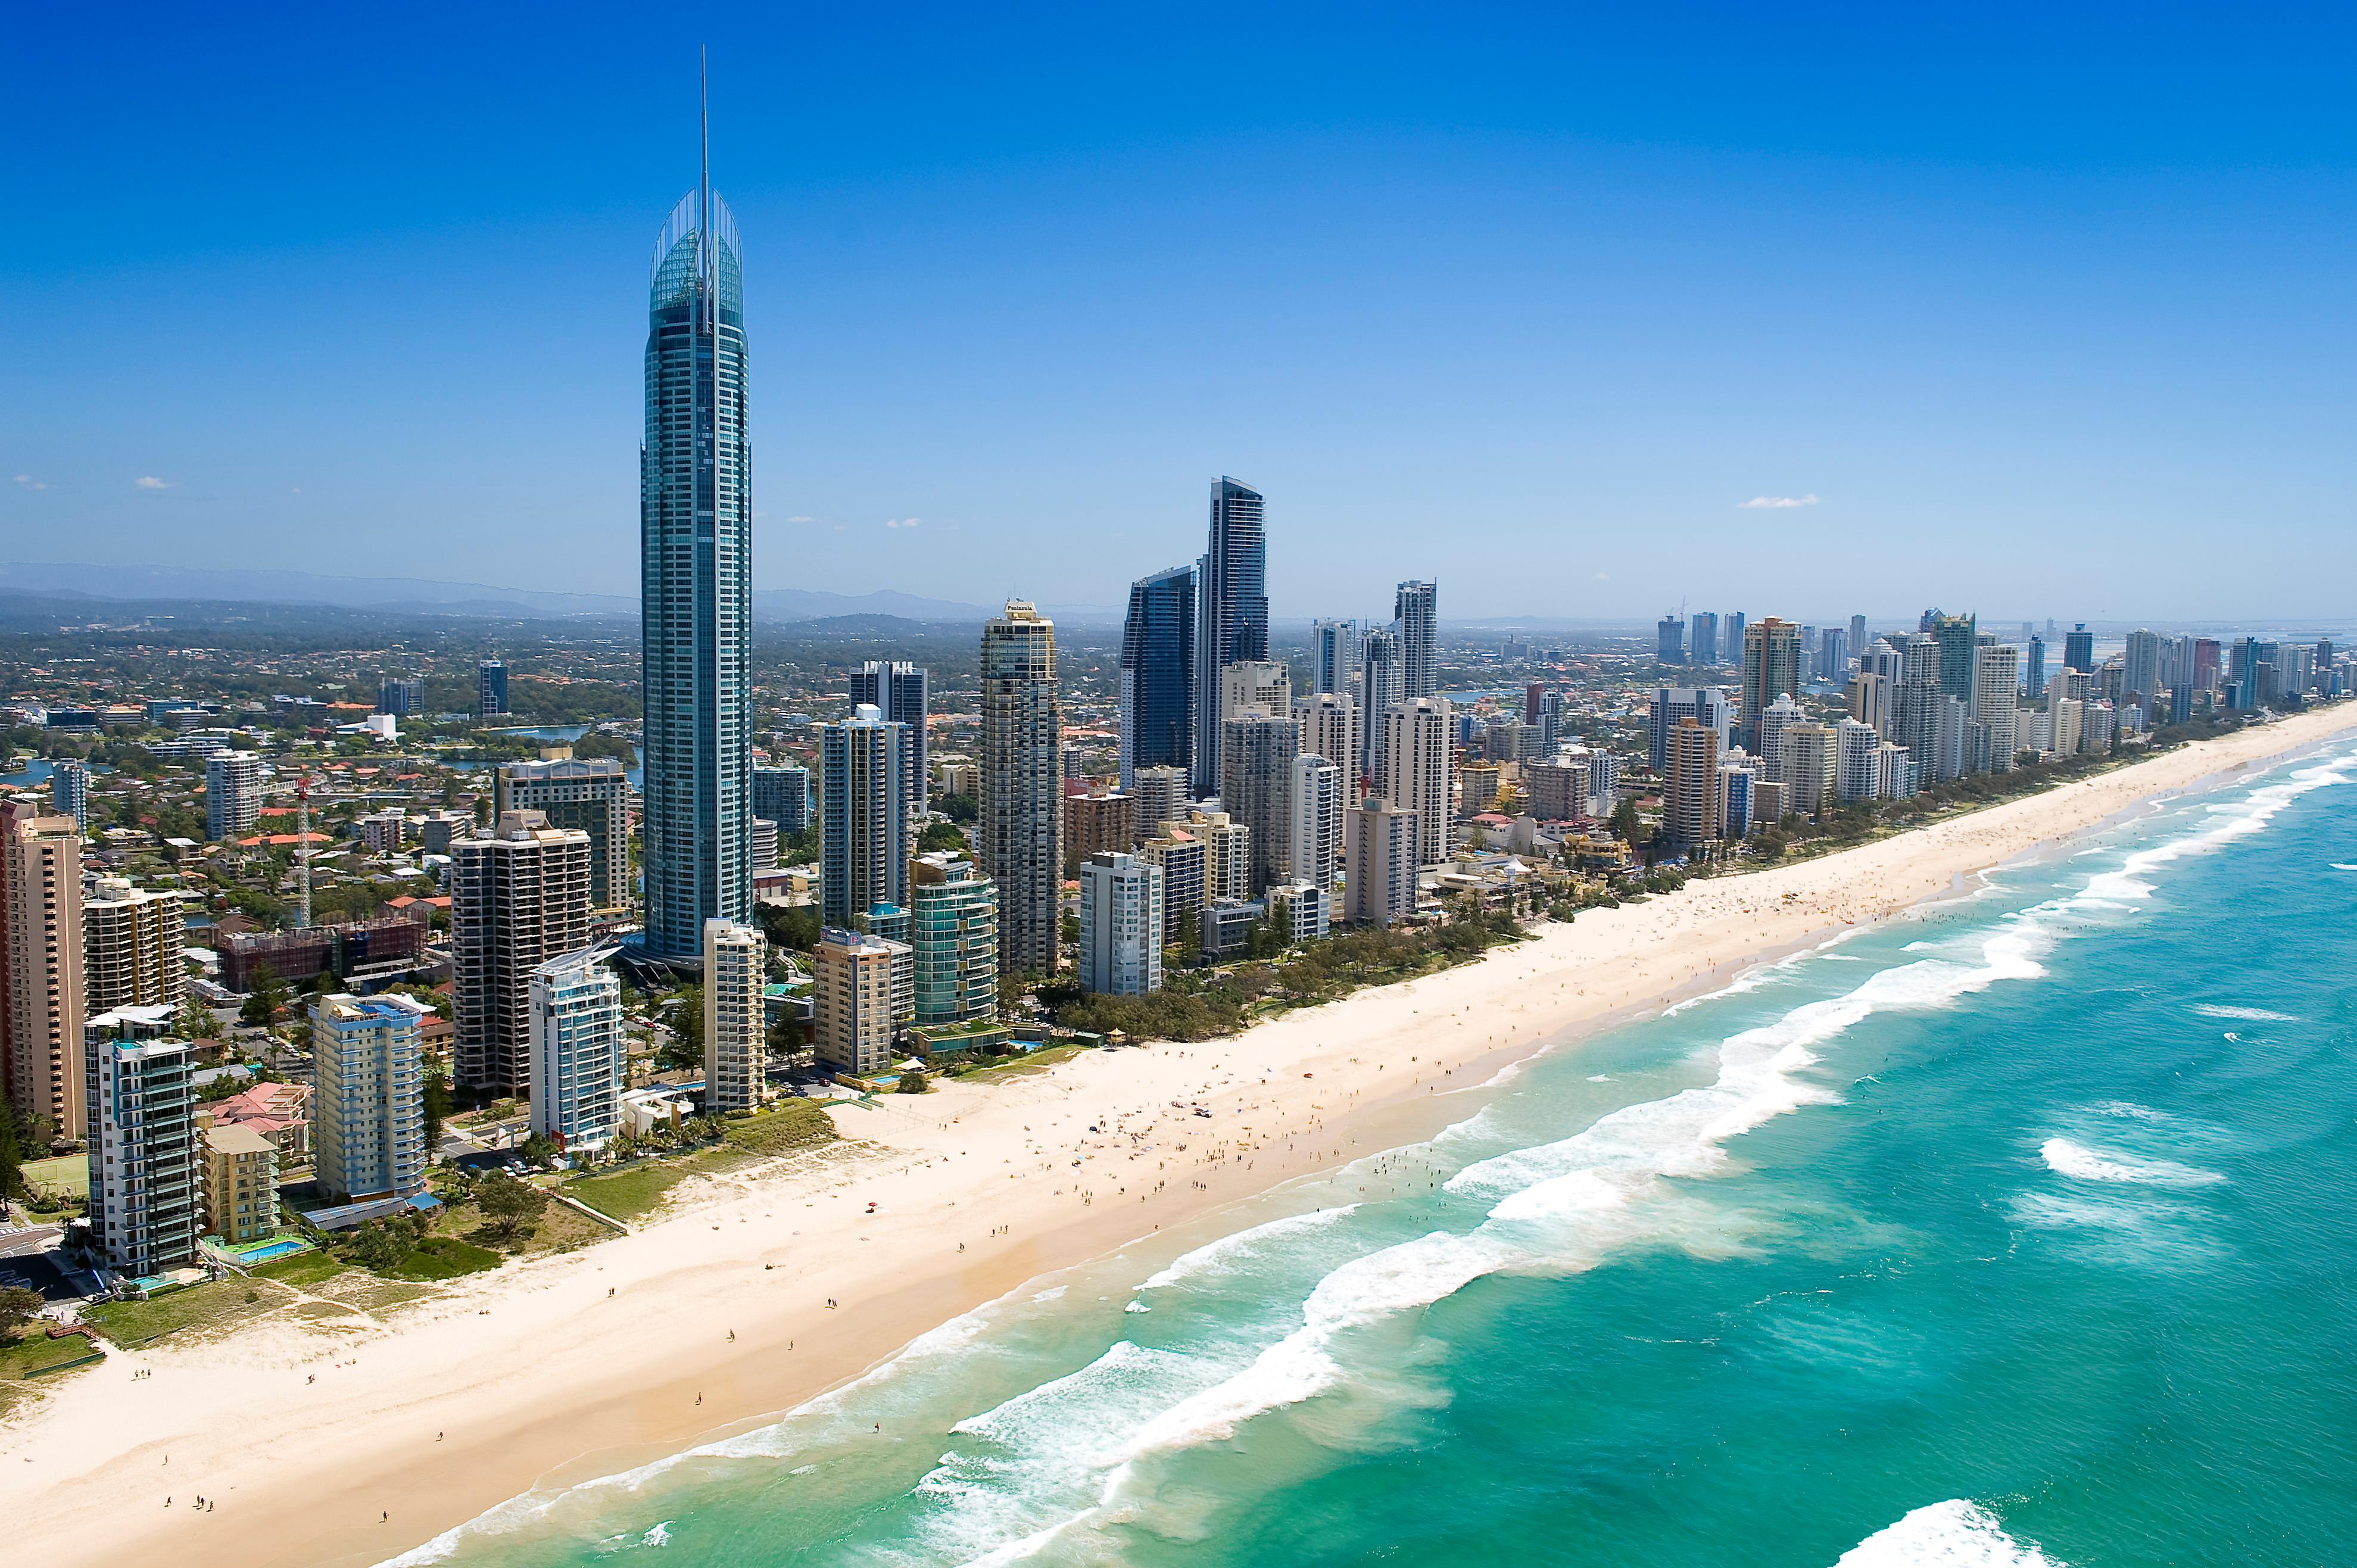 13 the Magical Attraction of Gold Coast, Australia LoveHate Relationship